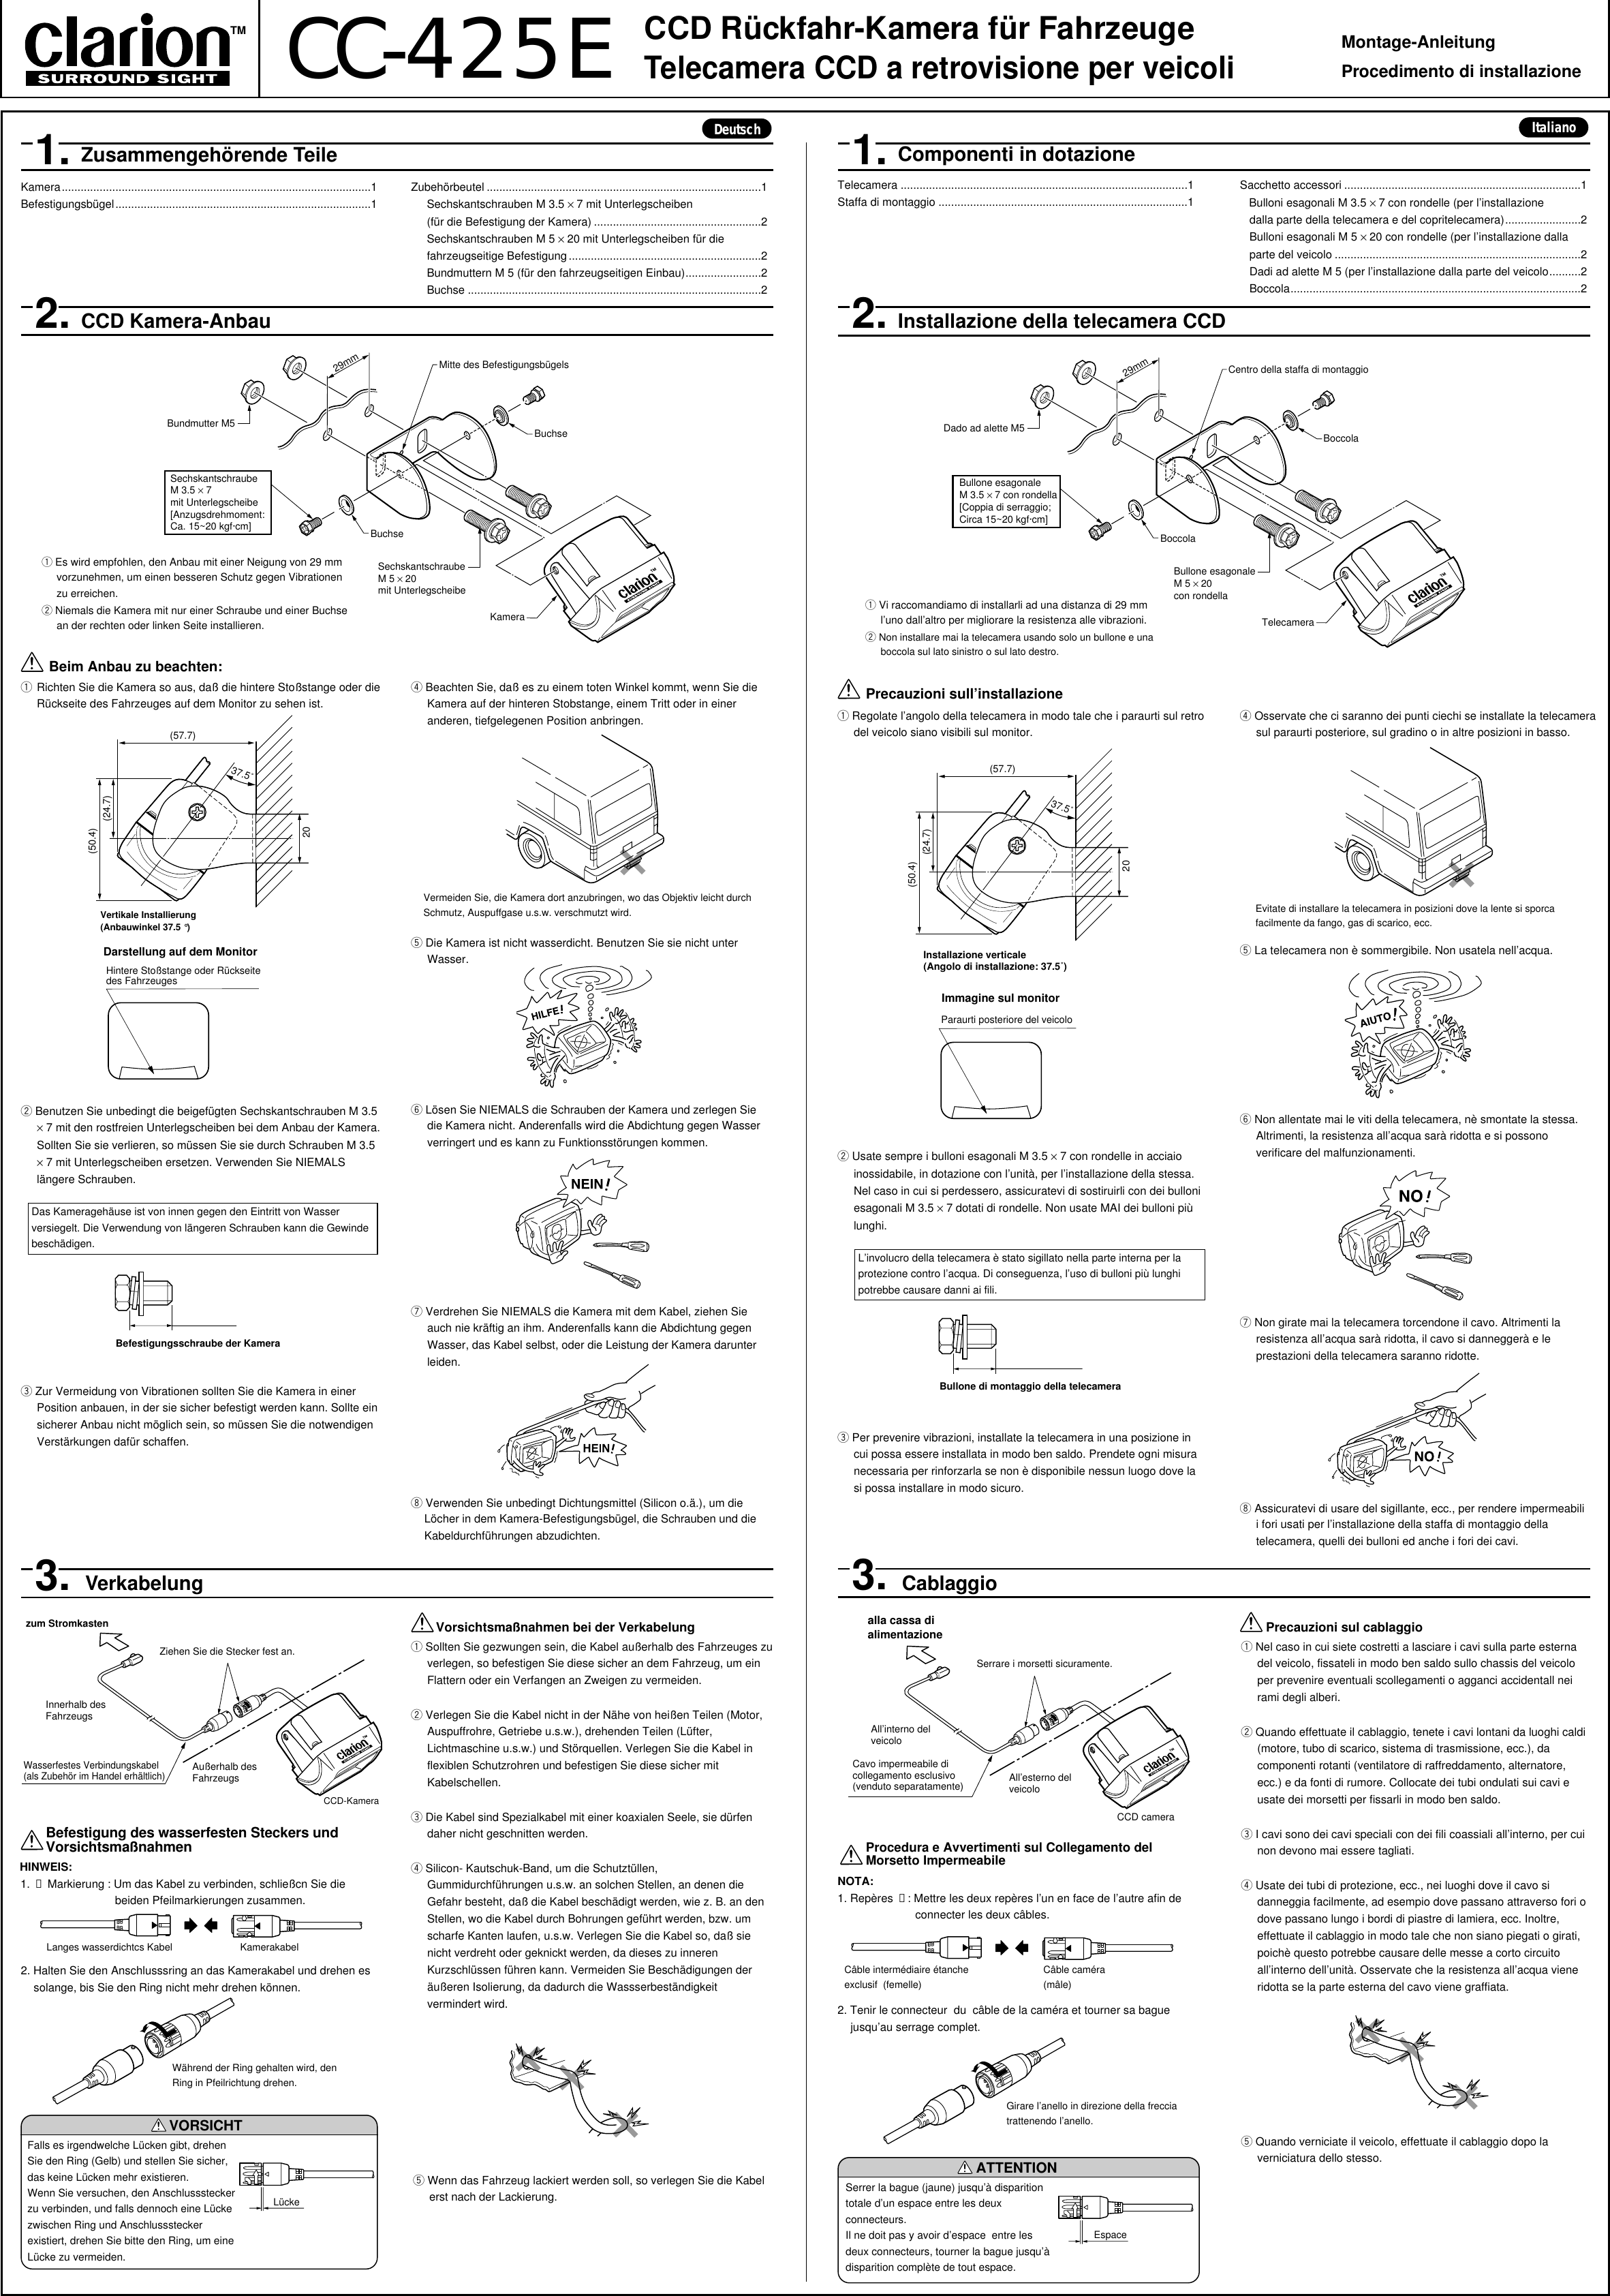 Page 2 of 2 - Clarion Clarion-Surround-Sight-Cc-425E-Users-Manual-  Clarion-surround-sight-cc-425e-users-manual